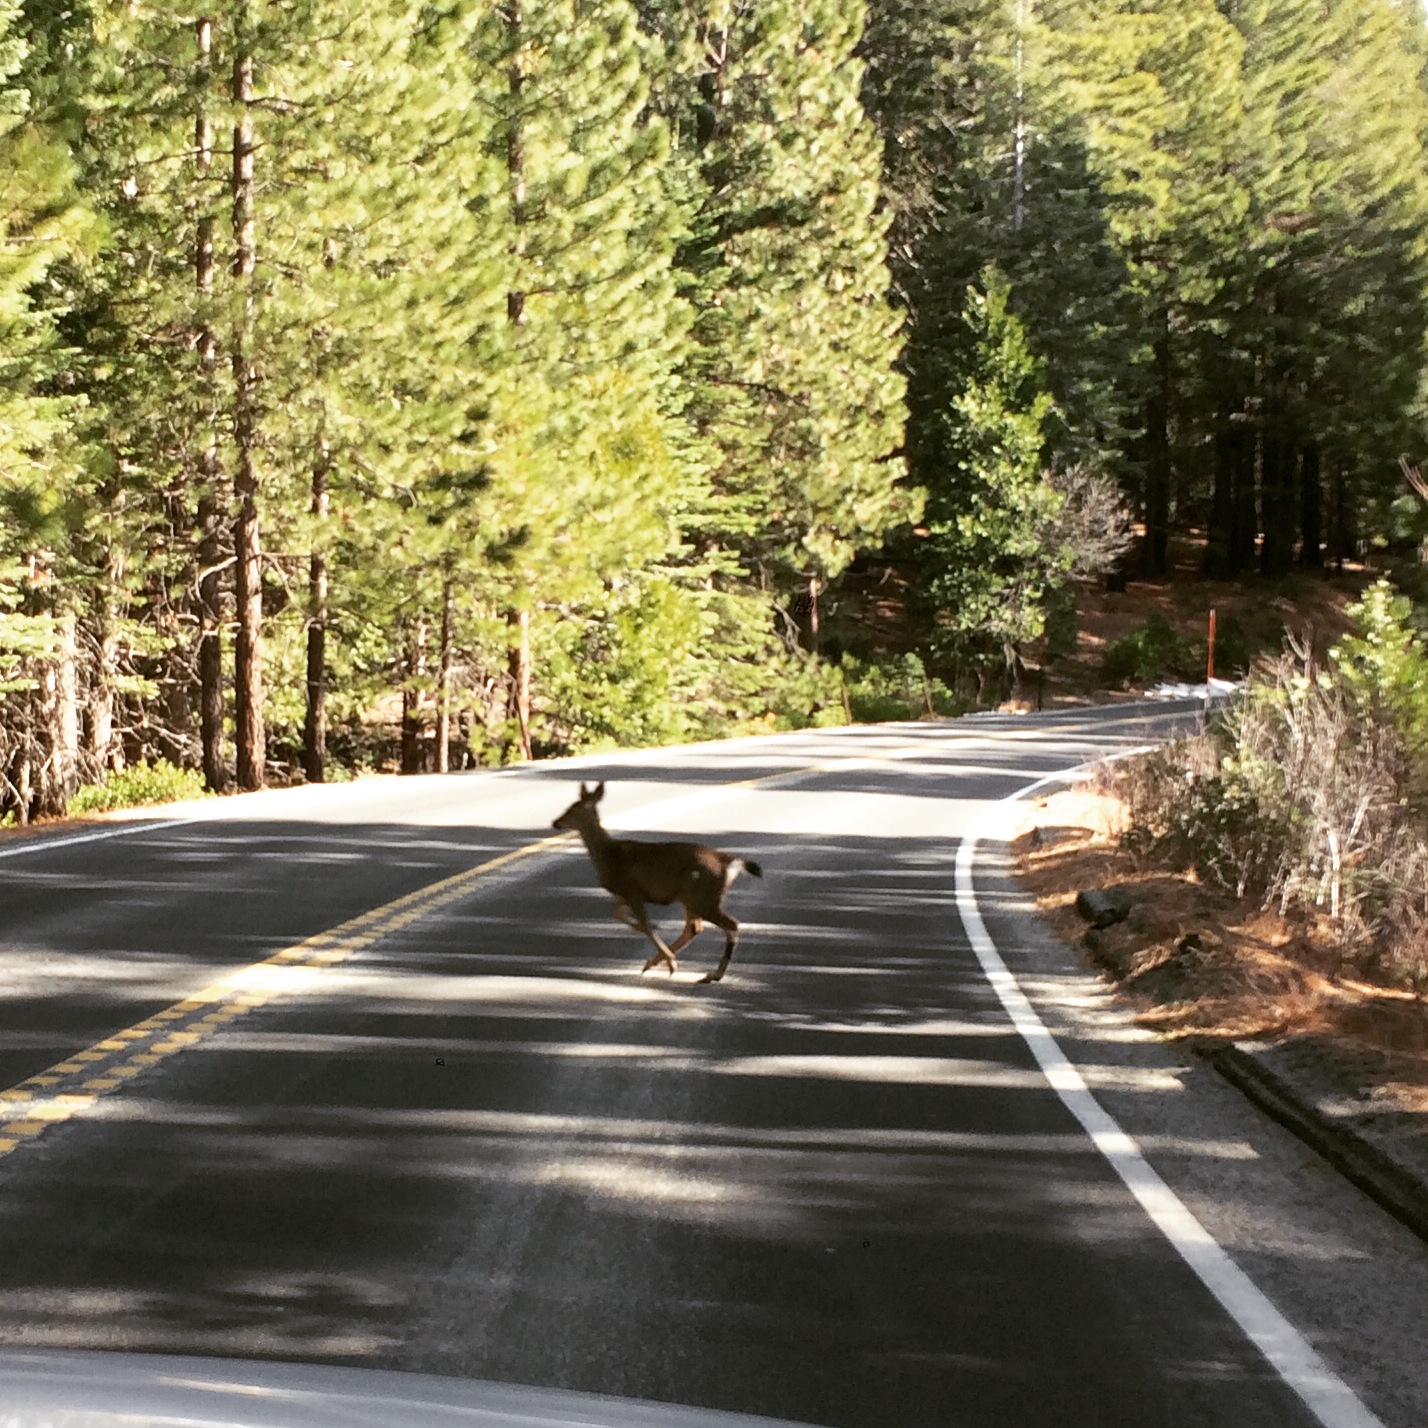 Deer family - driving in to Yosemite National Park